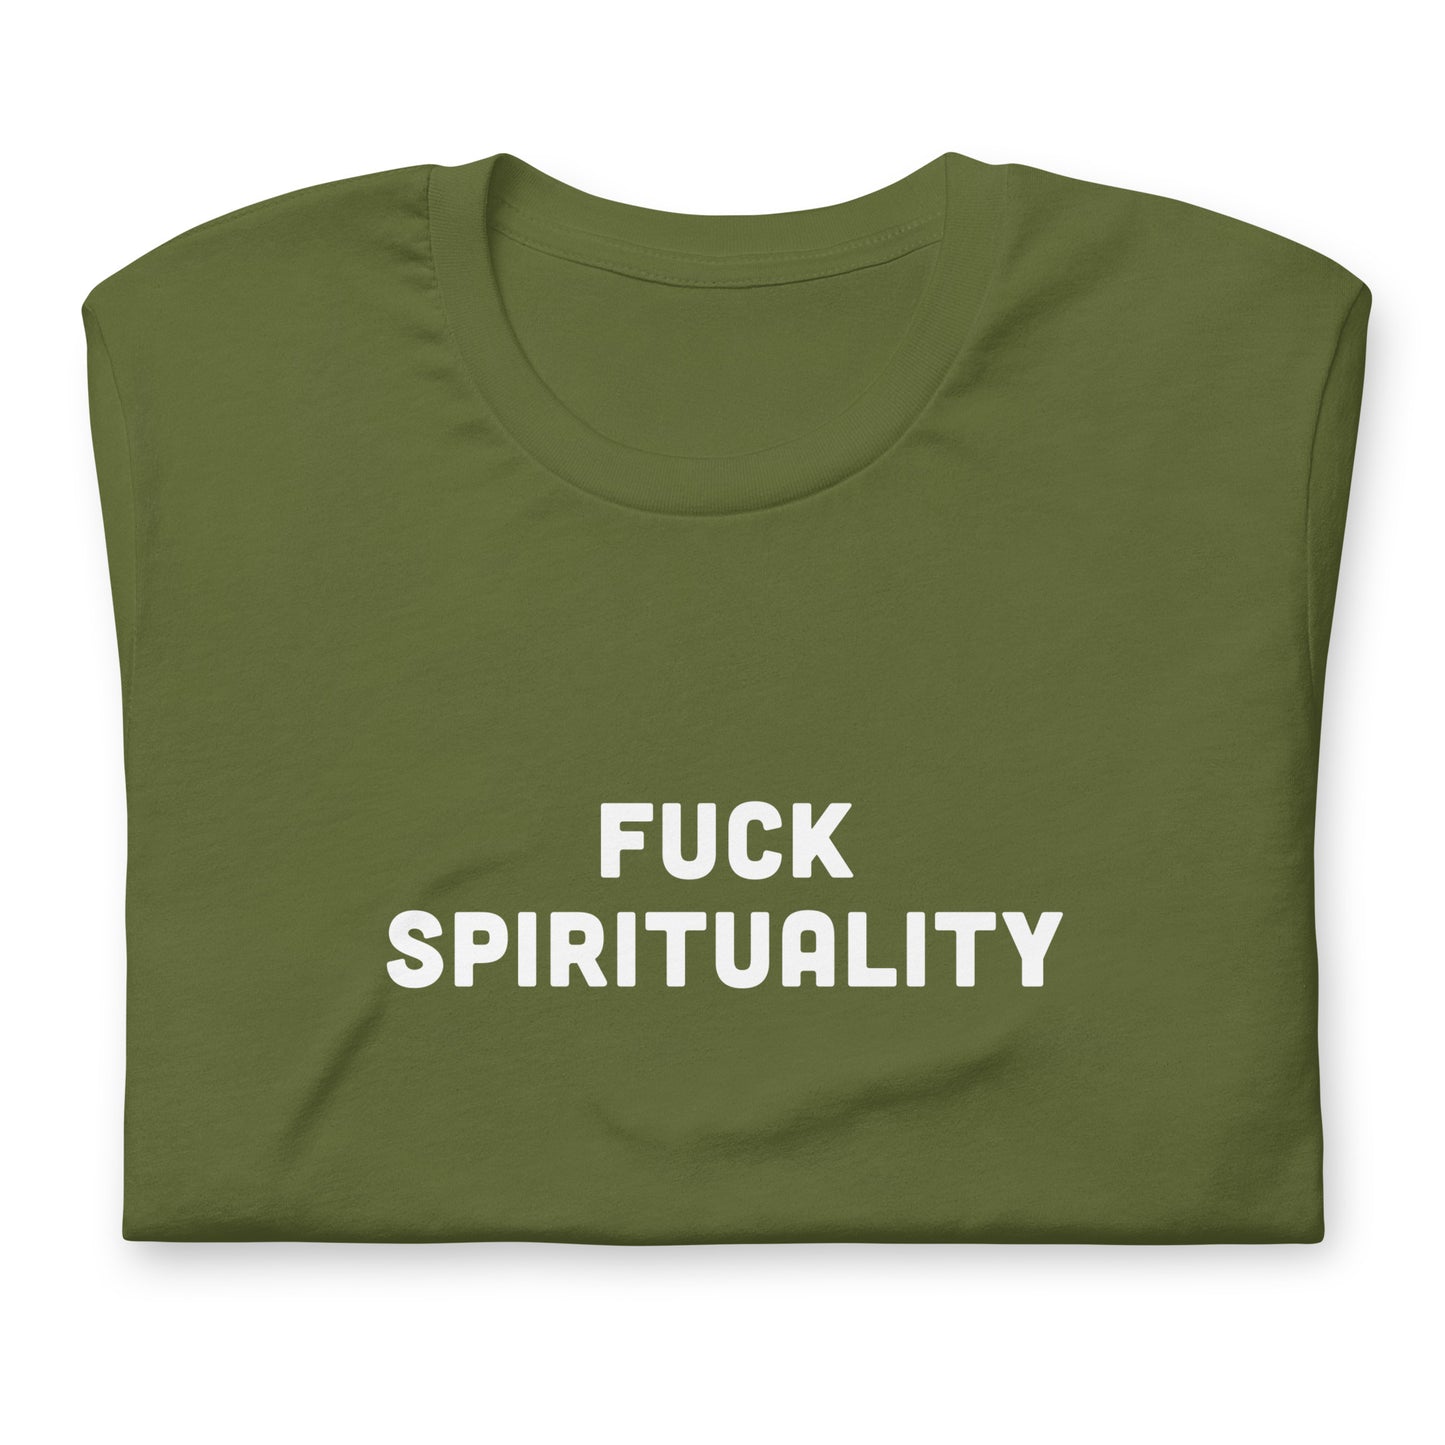 Fuck Spirituality T-Shirt Size S Color Navy